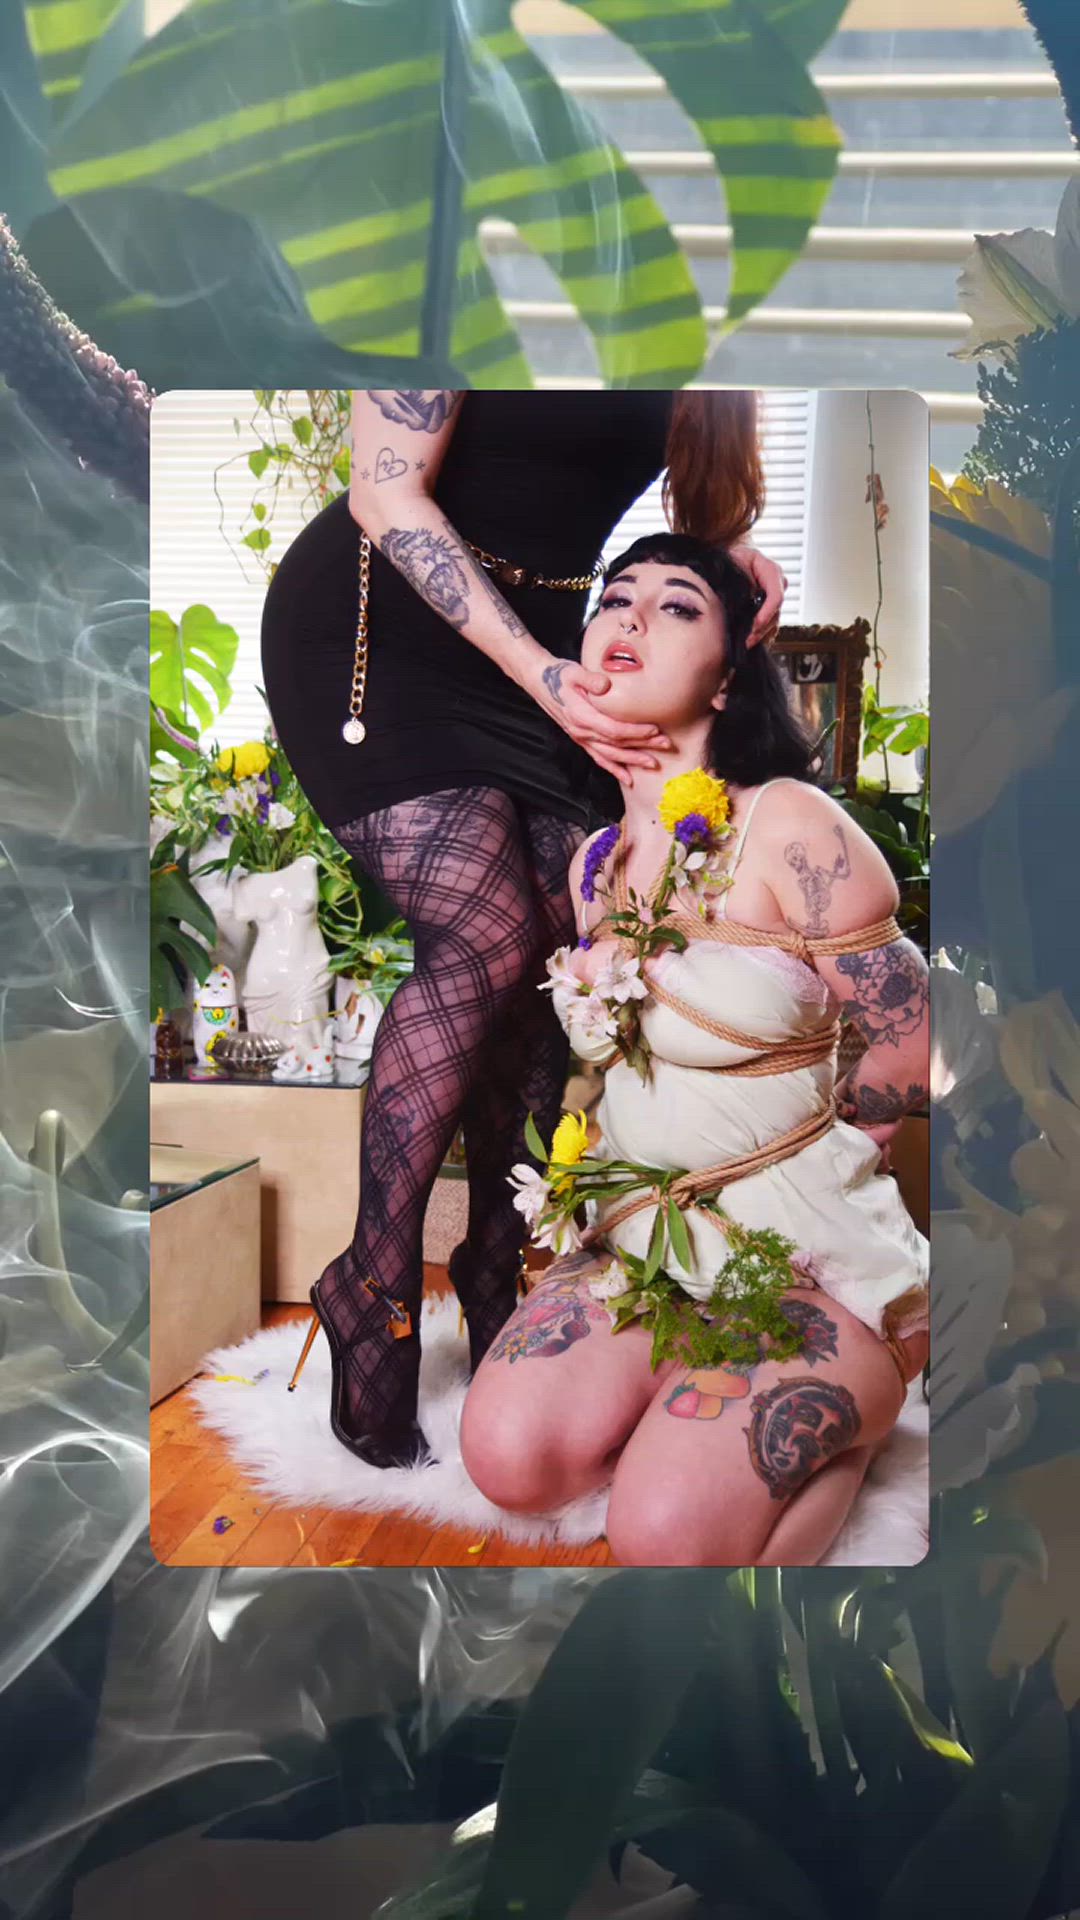 BDSM porn video with onlyfans model Freshie Juice <strong>@freshiejuice</strong>